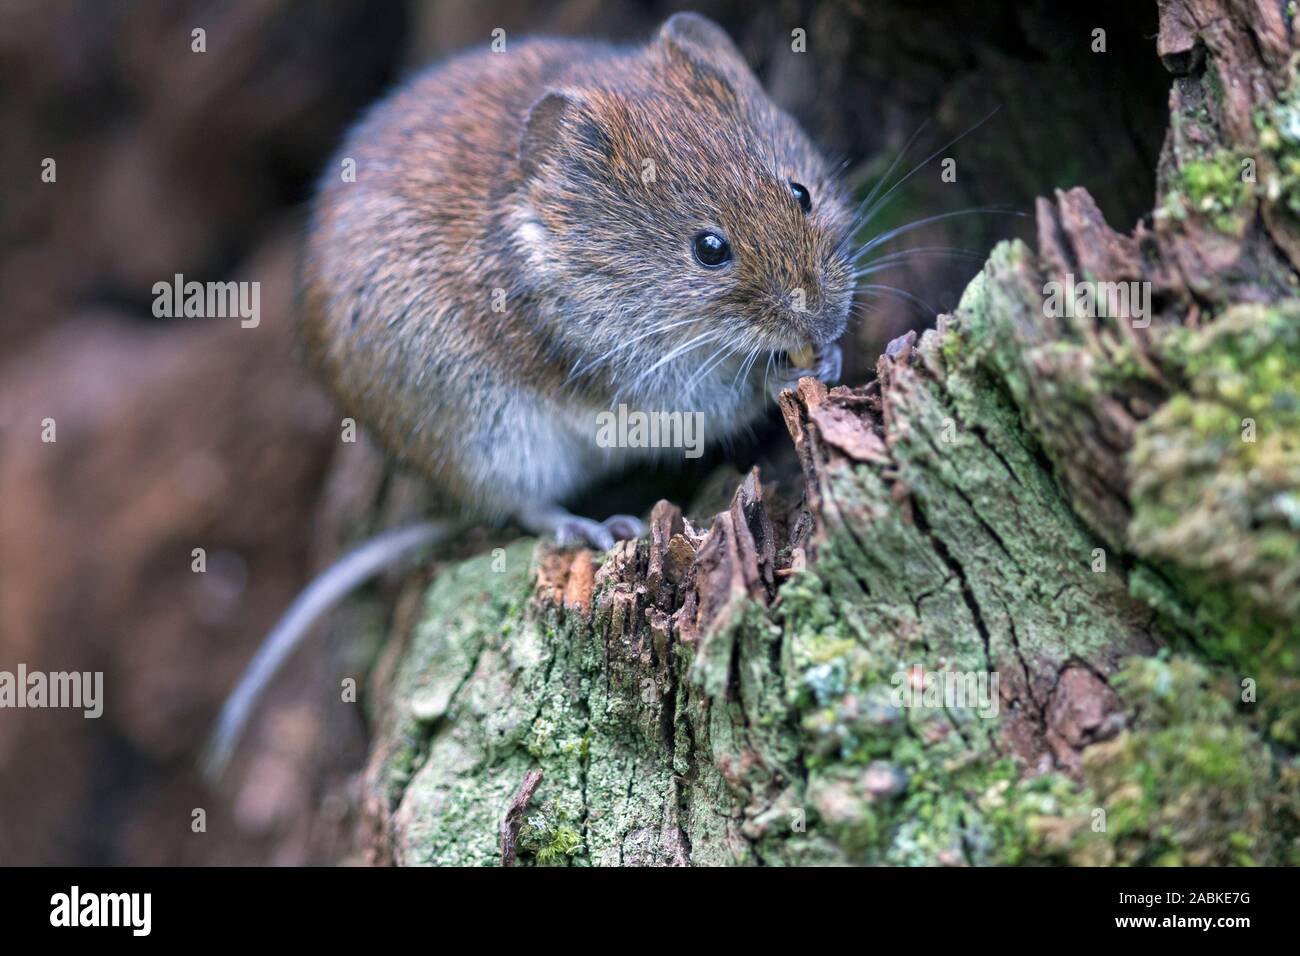 Bank Vole (Clethrionomys glareolus). Adult on the root of a tree. Germany Stock Photo